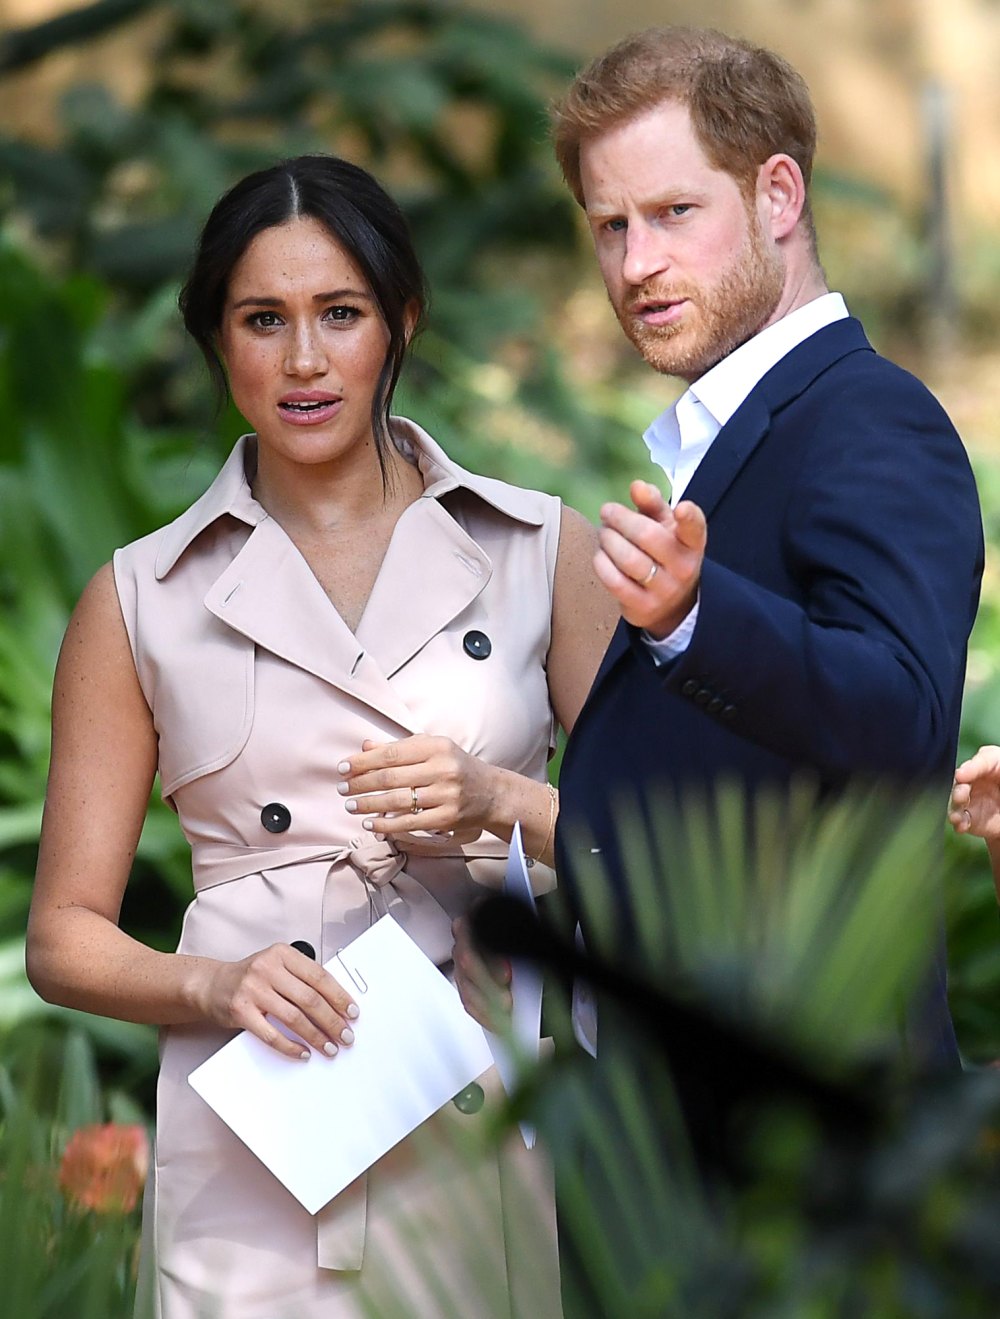 Prince Harry ‘Snapped’ at Meghan Markle During Blowout Fight: I Was ‘Sloppily Angry’